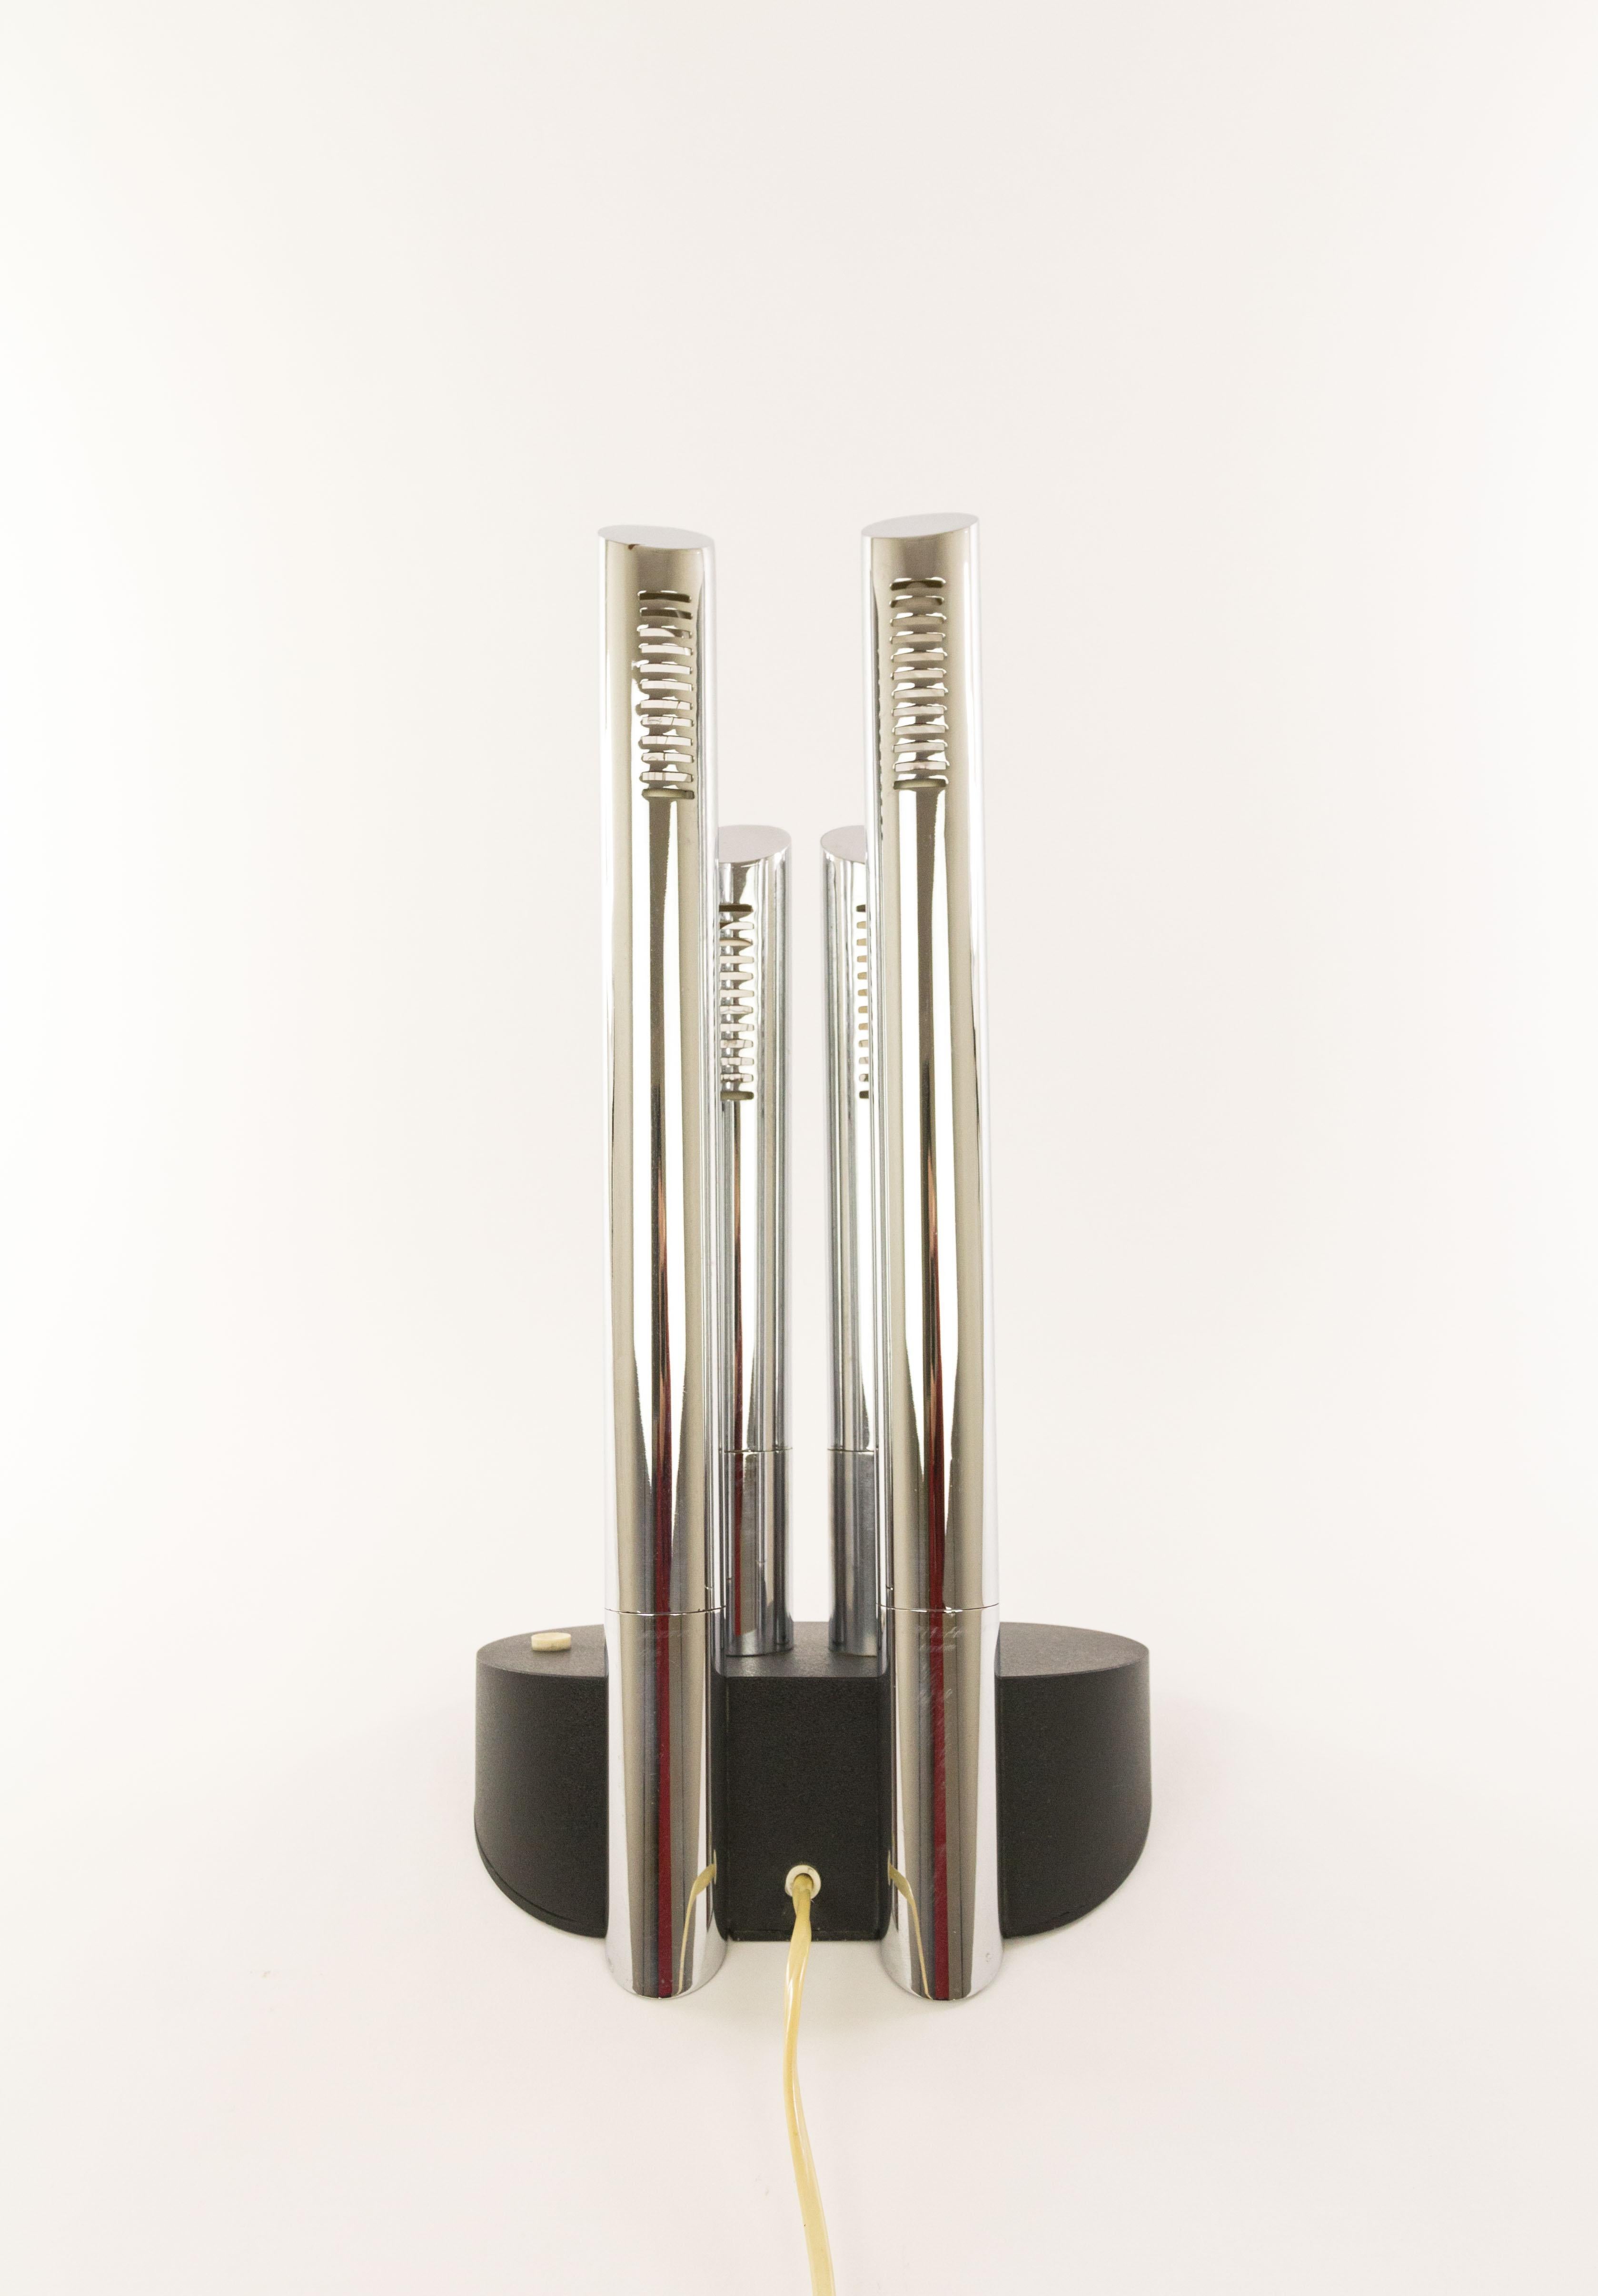 Chrome T443 Table lamp by Mario Faggian for Luci Illuminazione, 1970s For Sale 1